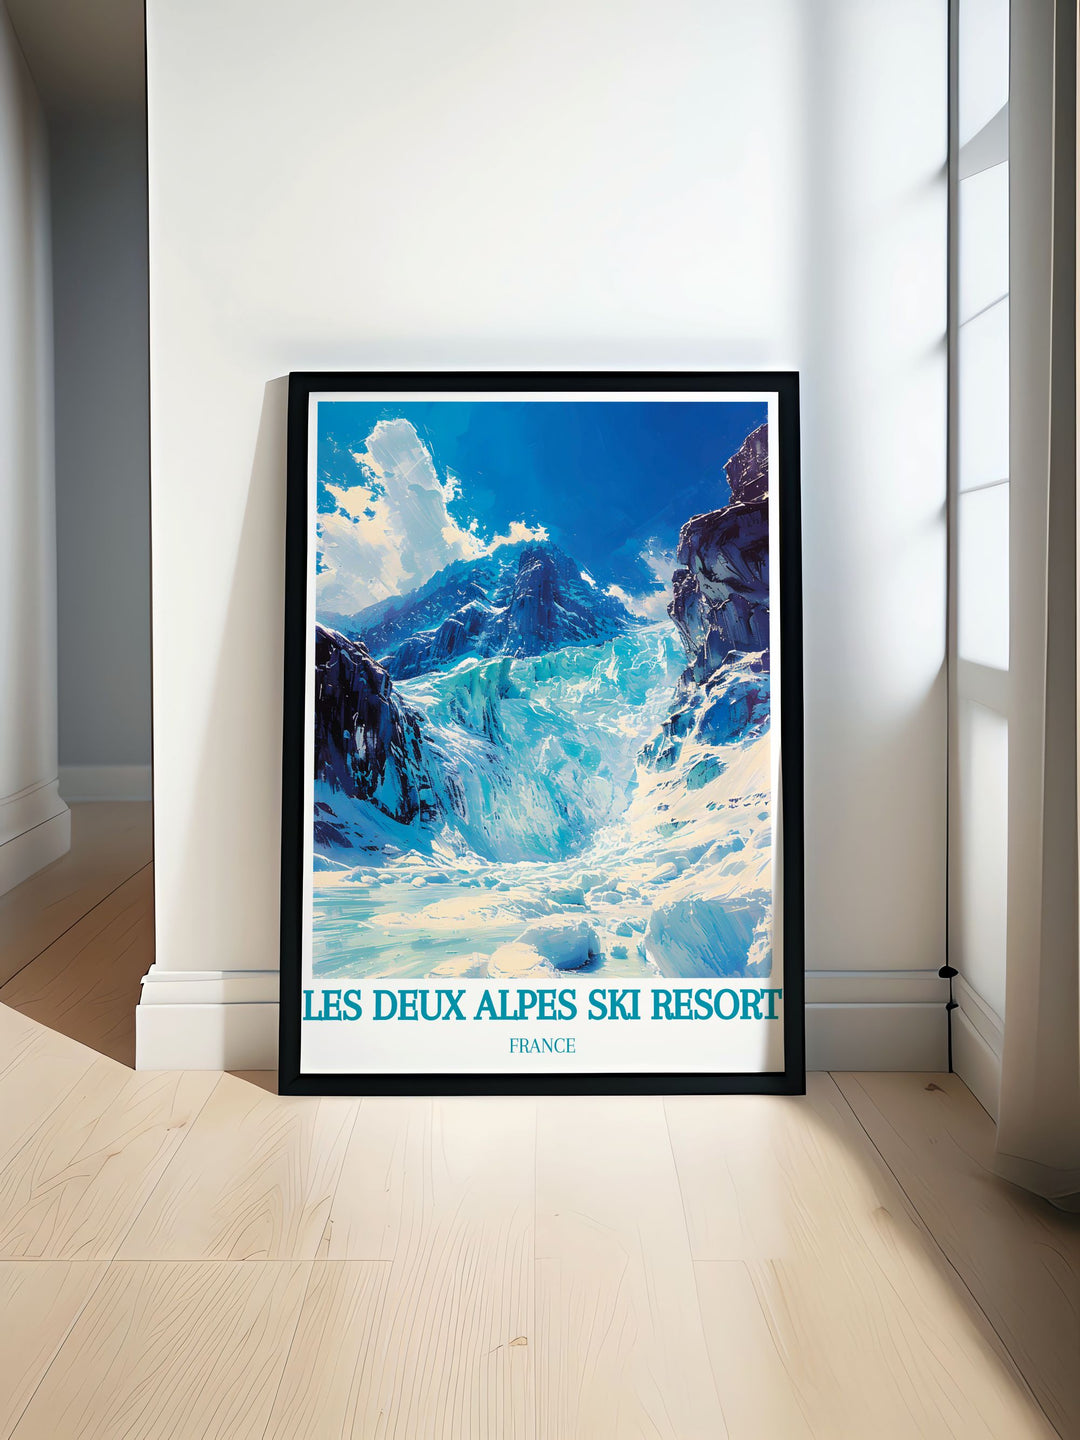 Experience the thrill of skiing in the French Alps with this detailed poster of Les Deux Alpes, capturing the resorts lively atmosphere and extensive pistes, perfect for your home decor.